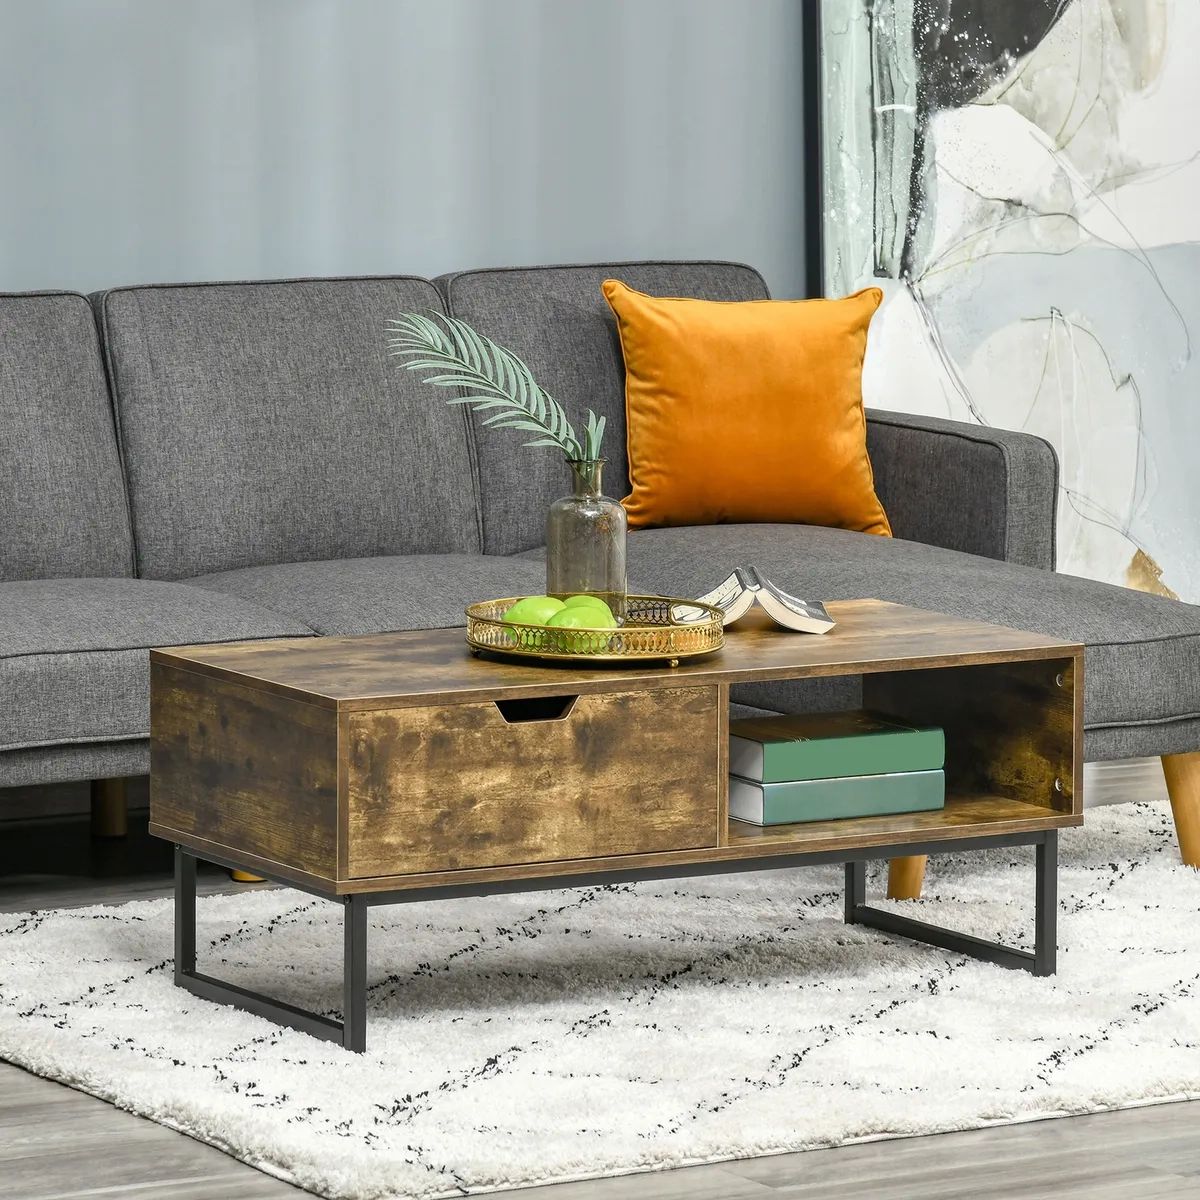 Industrial Coffee Table With Shortage Shelf & Drawer End Table Metal Frame  Brown | Ebay Intended For Metal 1 Shelf Coffee Tables (View 5 of 15)